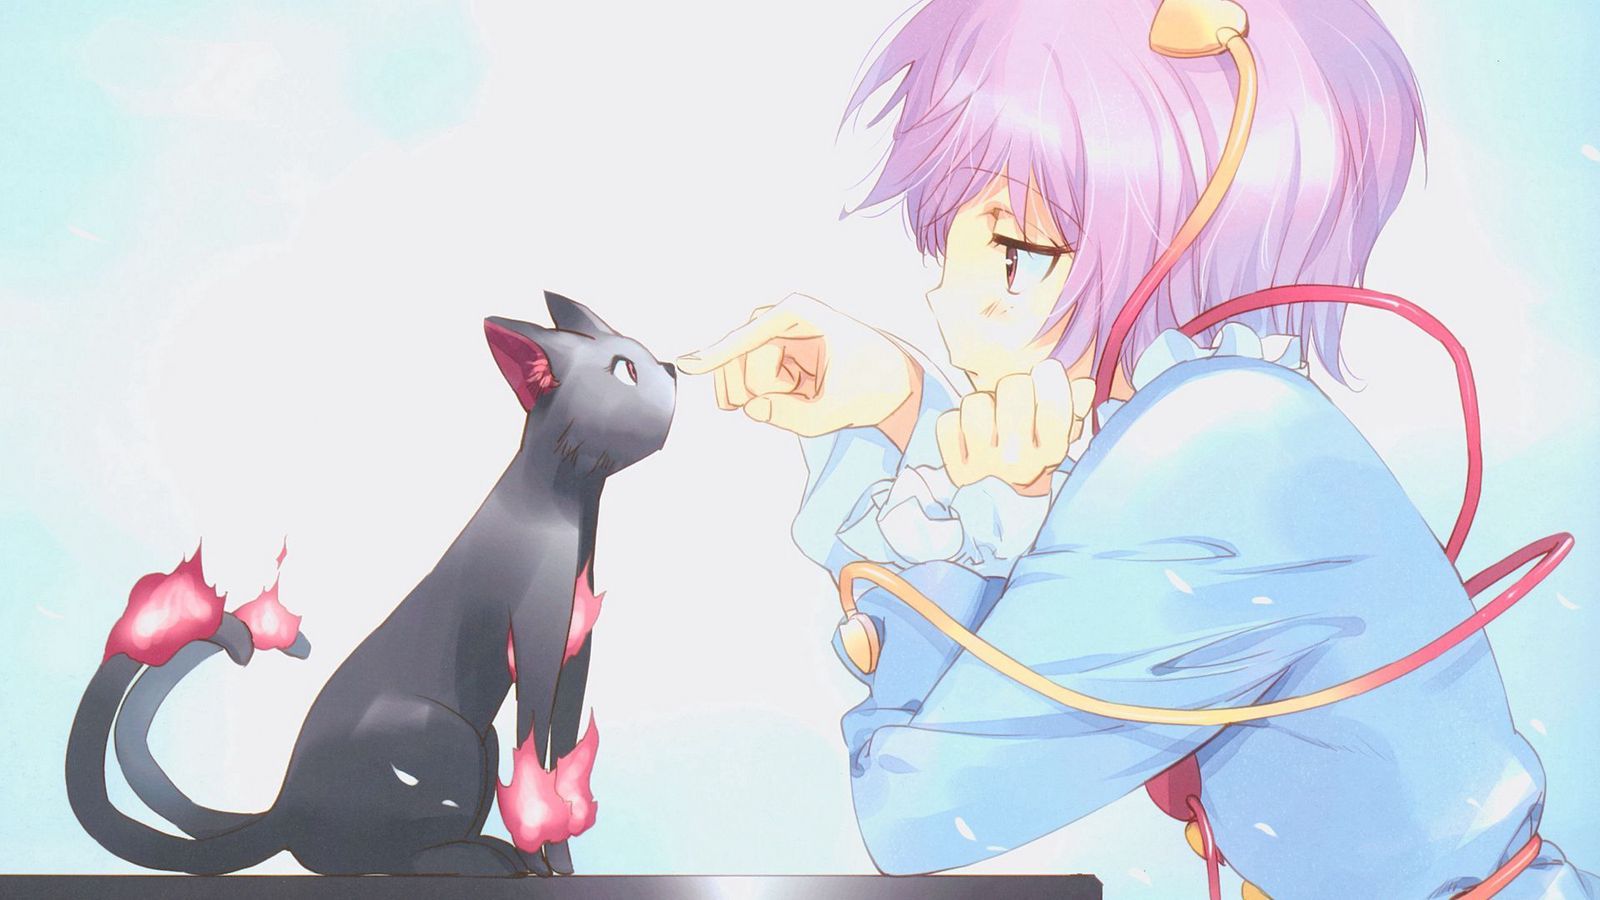 Download wallpaper 1600x900 anime, girl, cat, sadness, disappointment widescreen 16:9 HD background